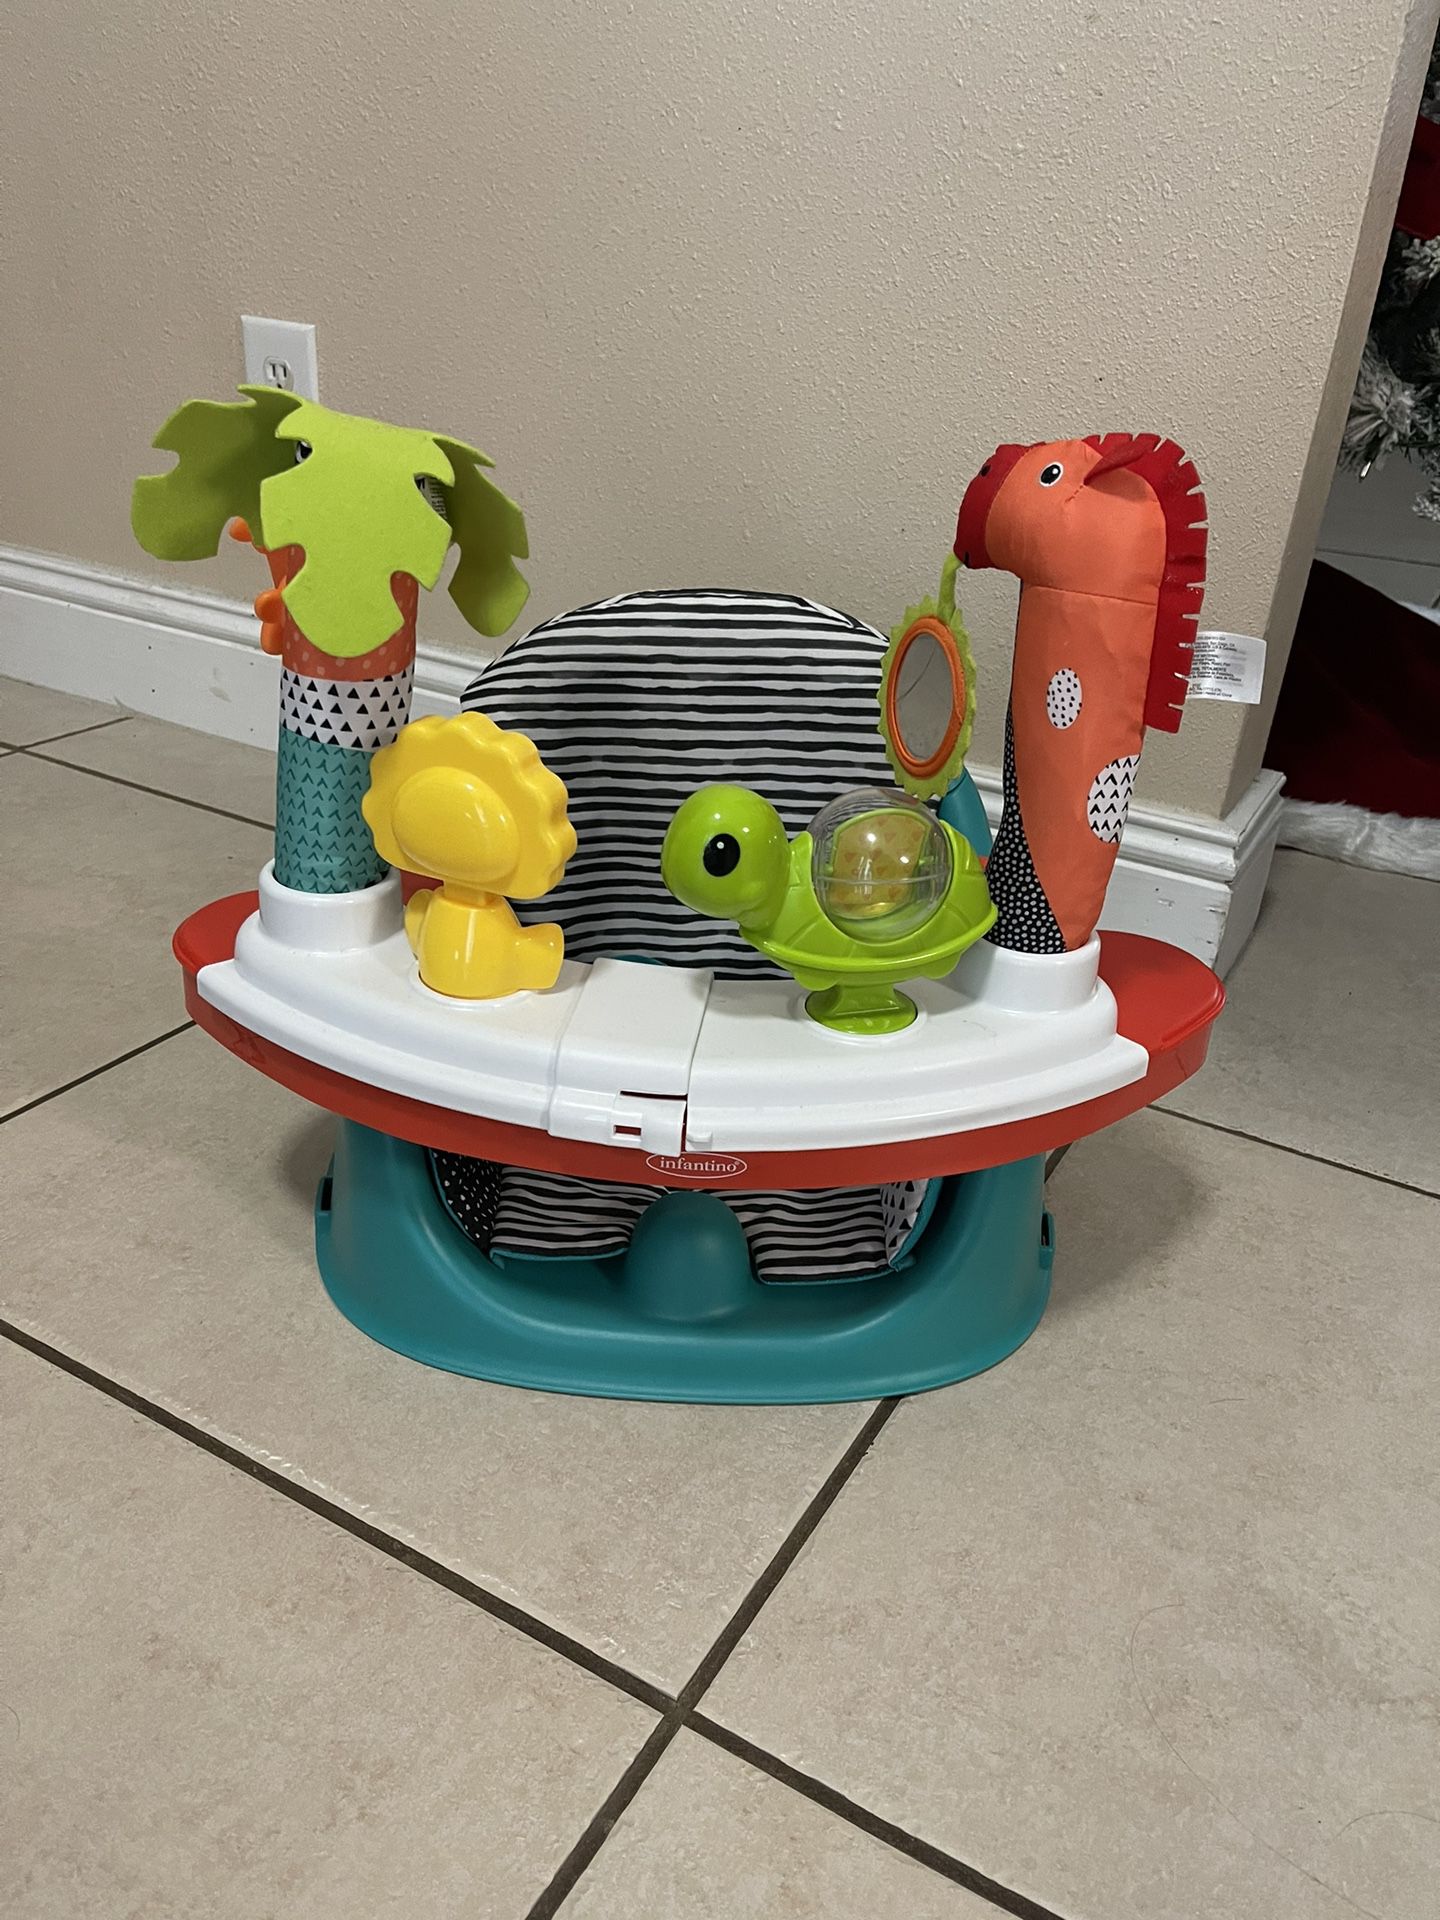 Infantino Portable Booster Seat For Babies - $5